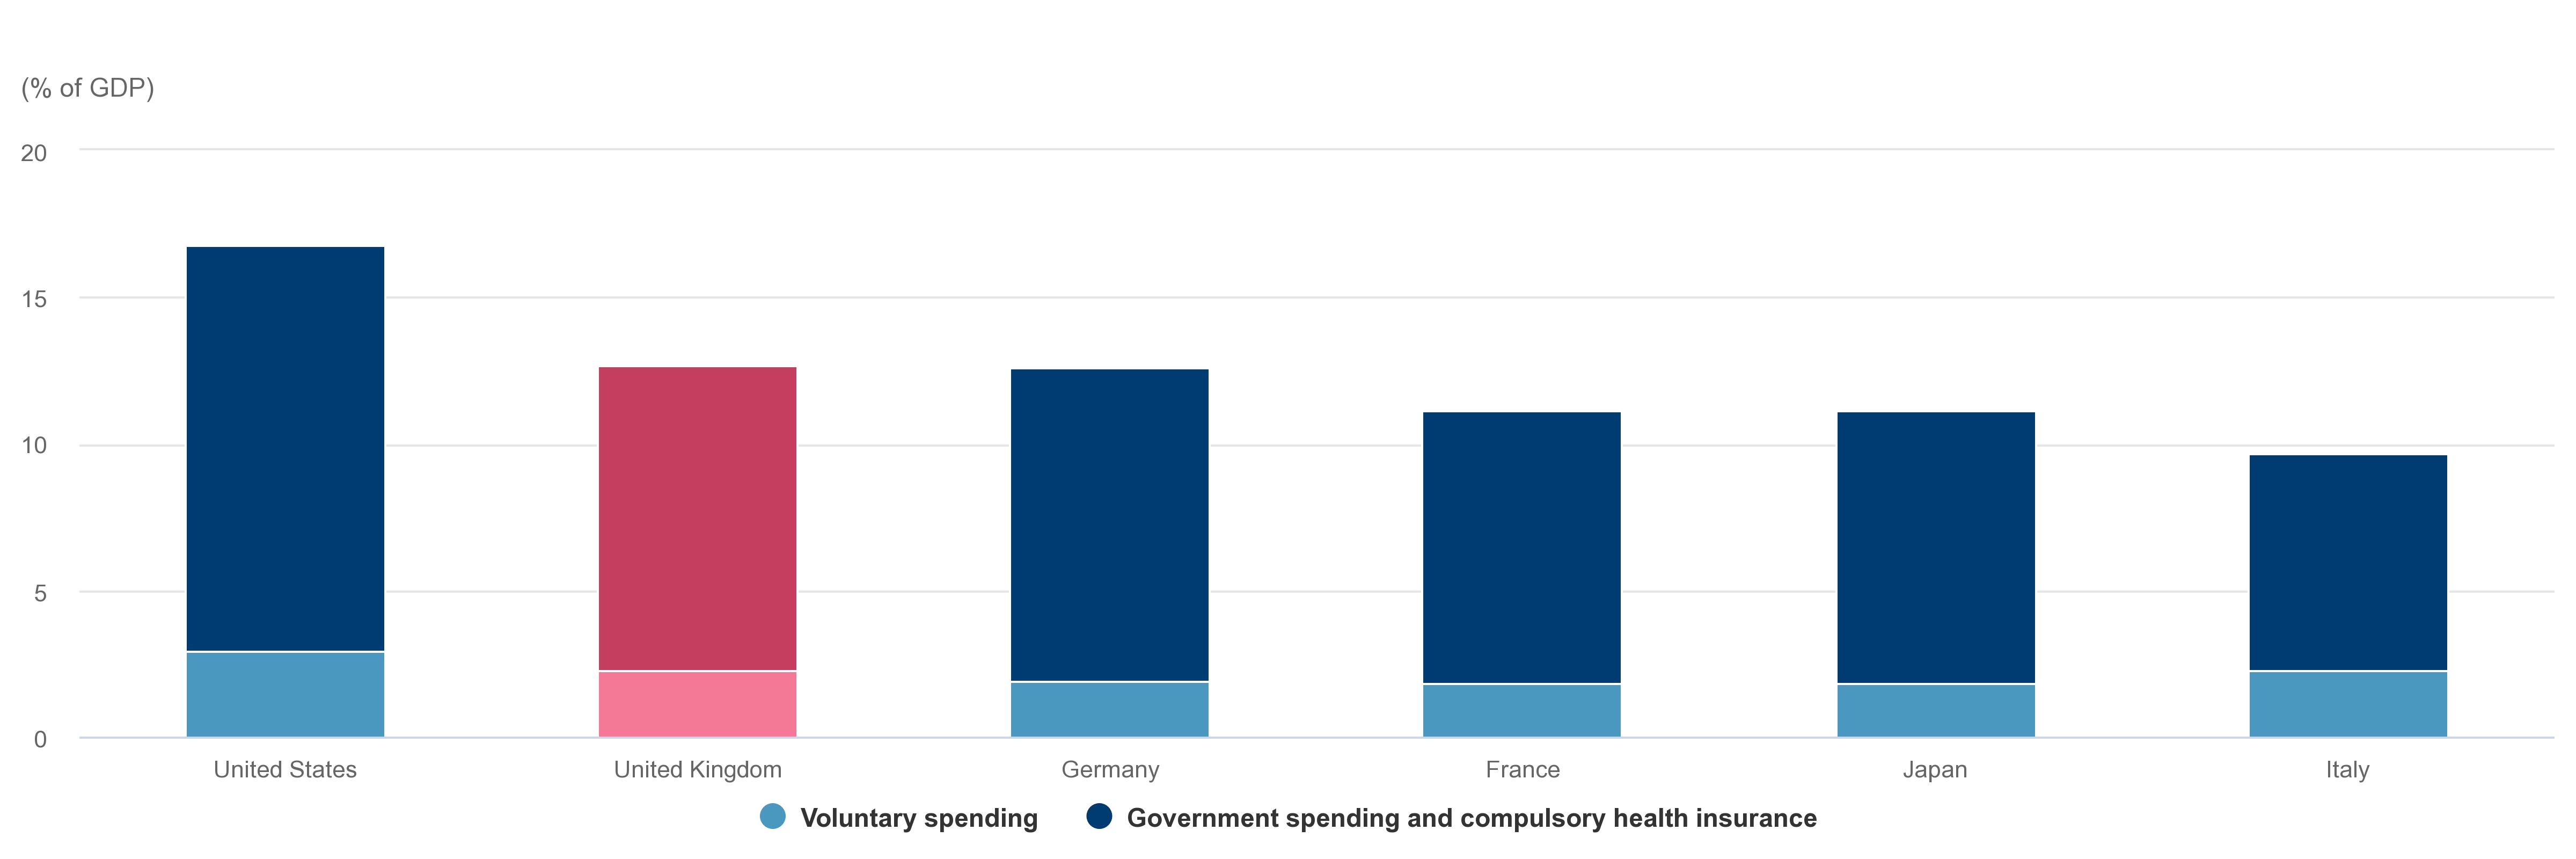 Health spending as a percentage of GDP for 2019 to 2020, broken down into total, government/compulsory and voluntary spending